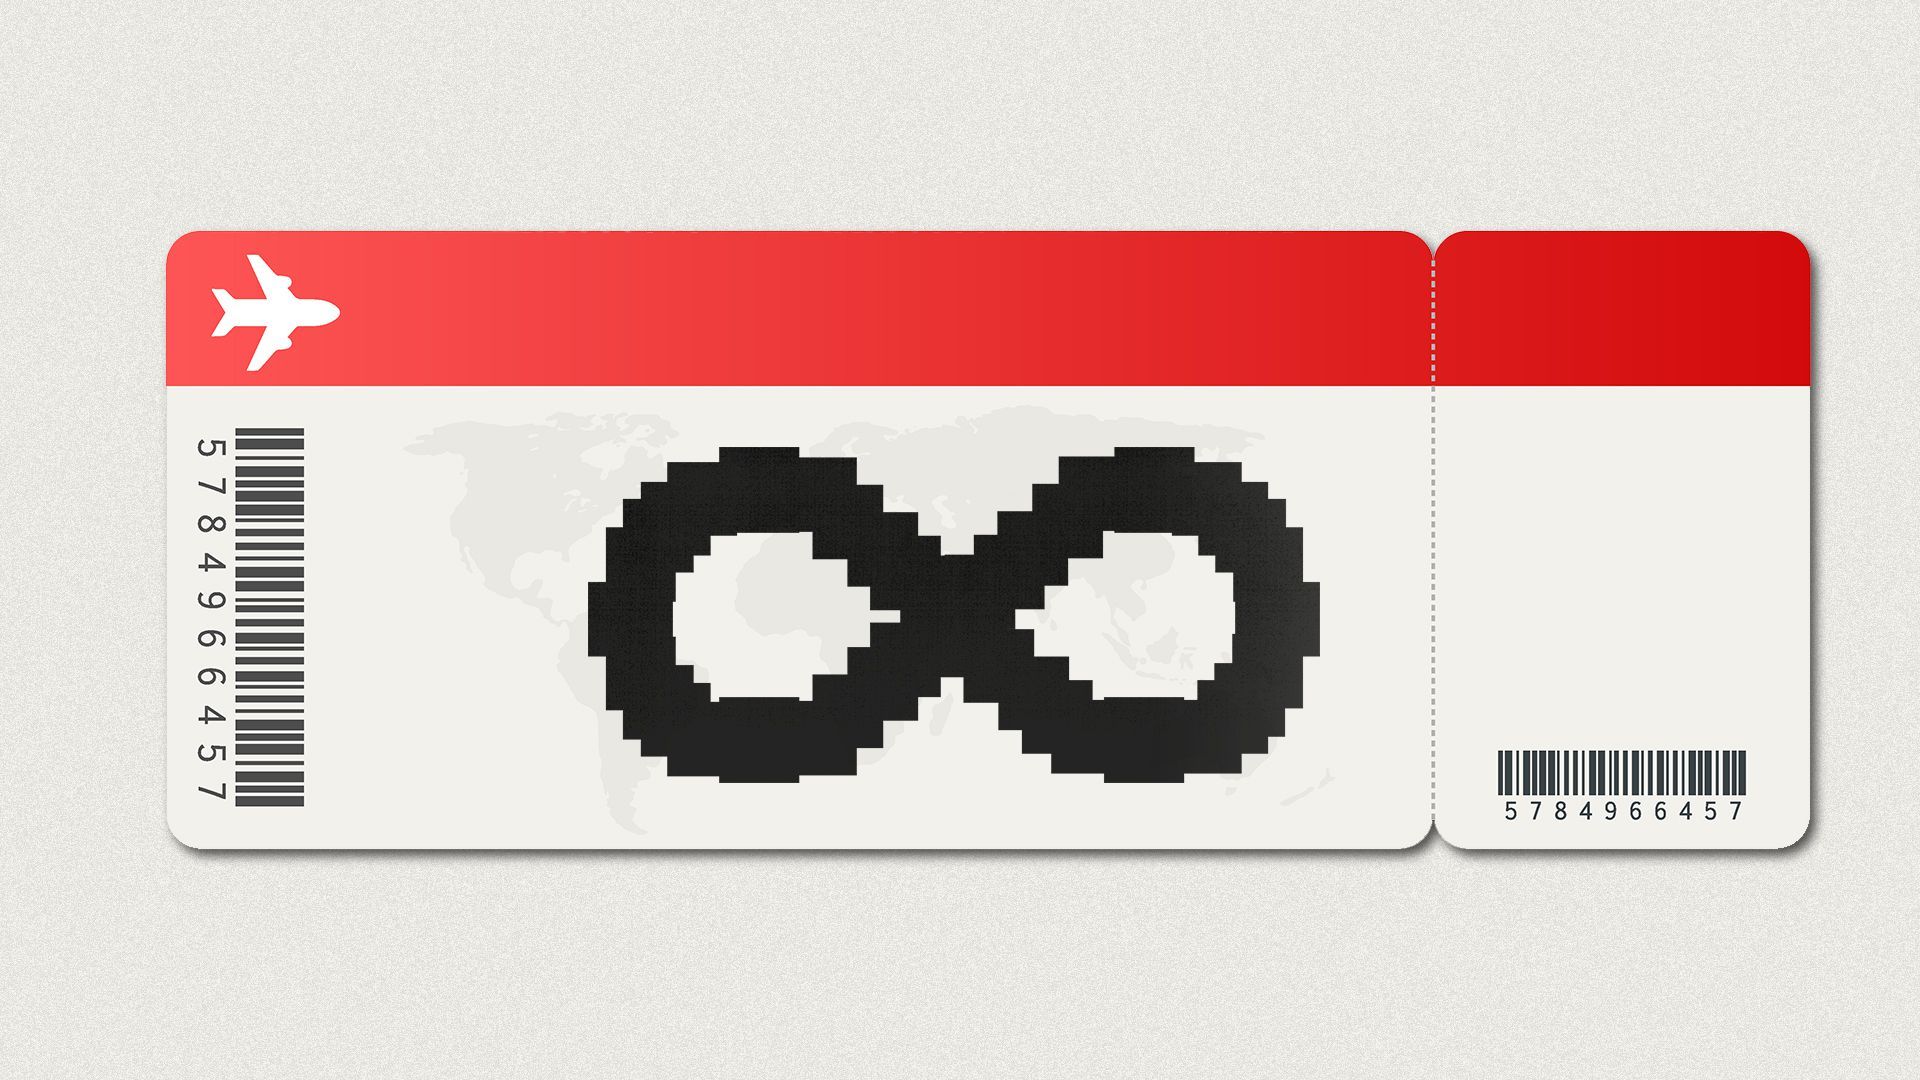 Illustration of an airline ticket with a large infinity sign printed on the front